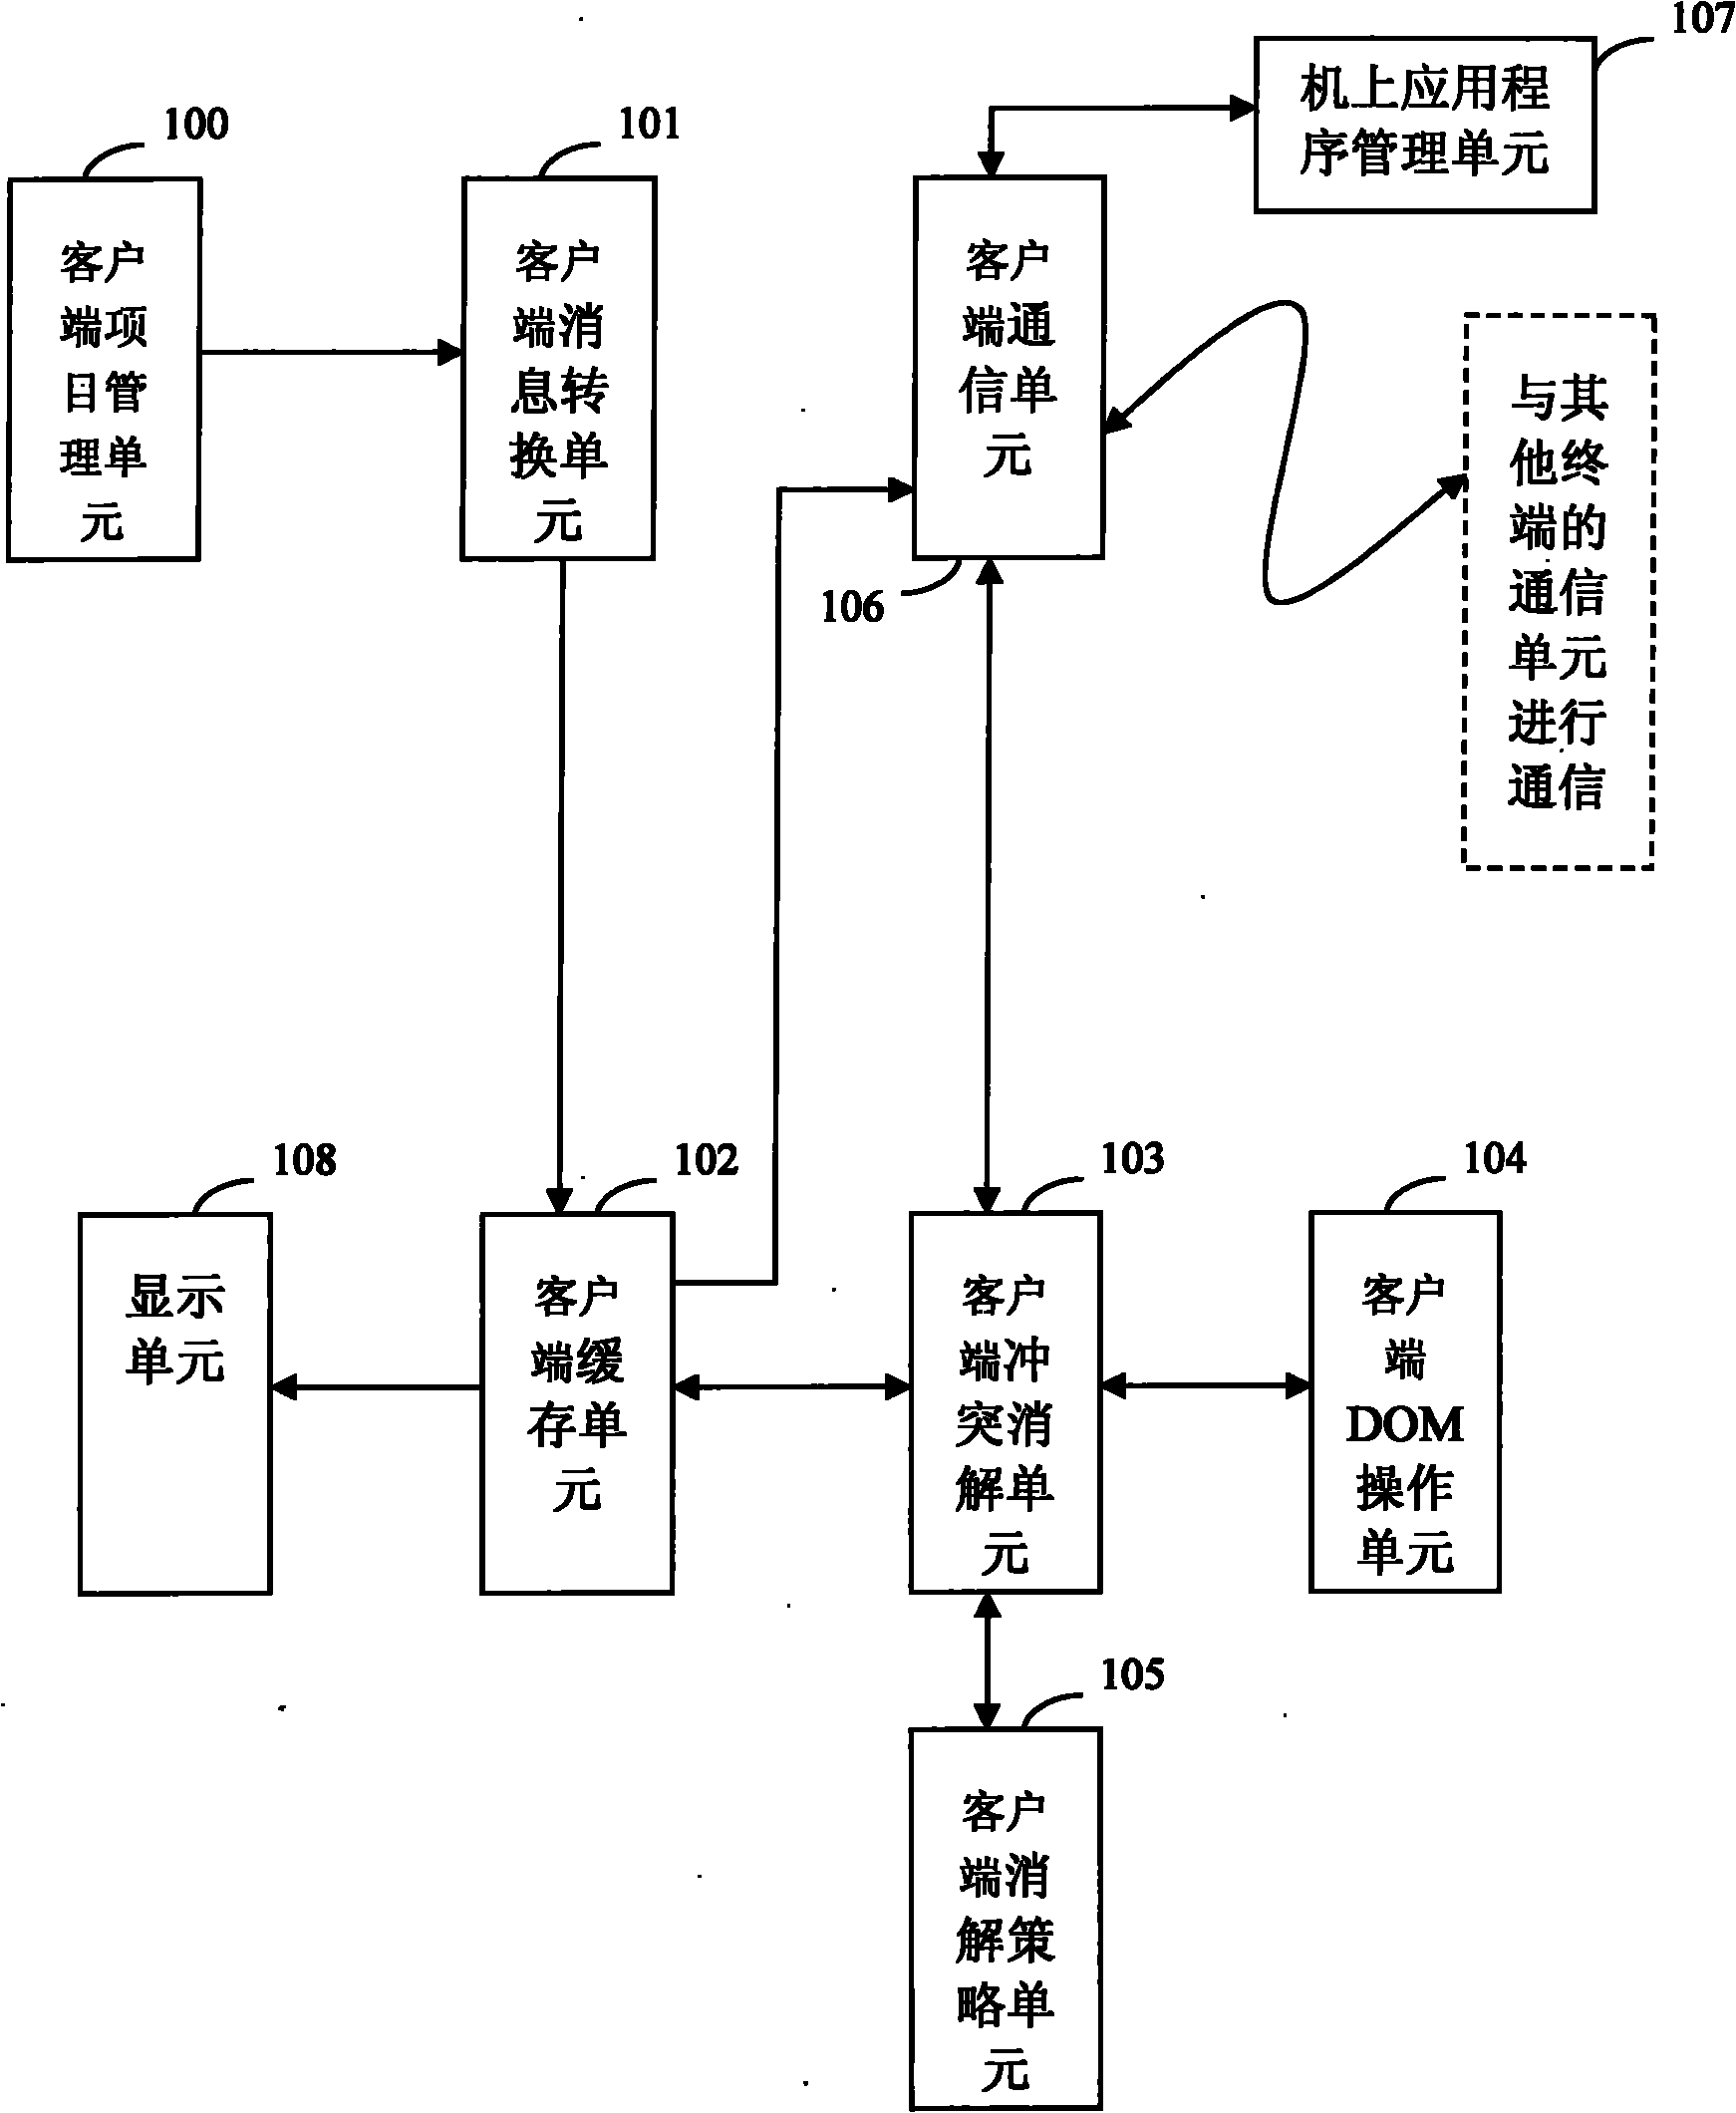 Middleware system for sharing data in mobile phone equipment and working method